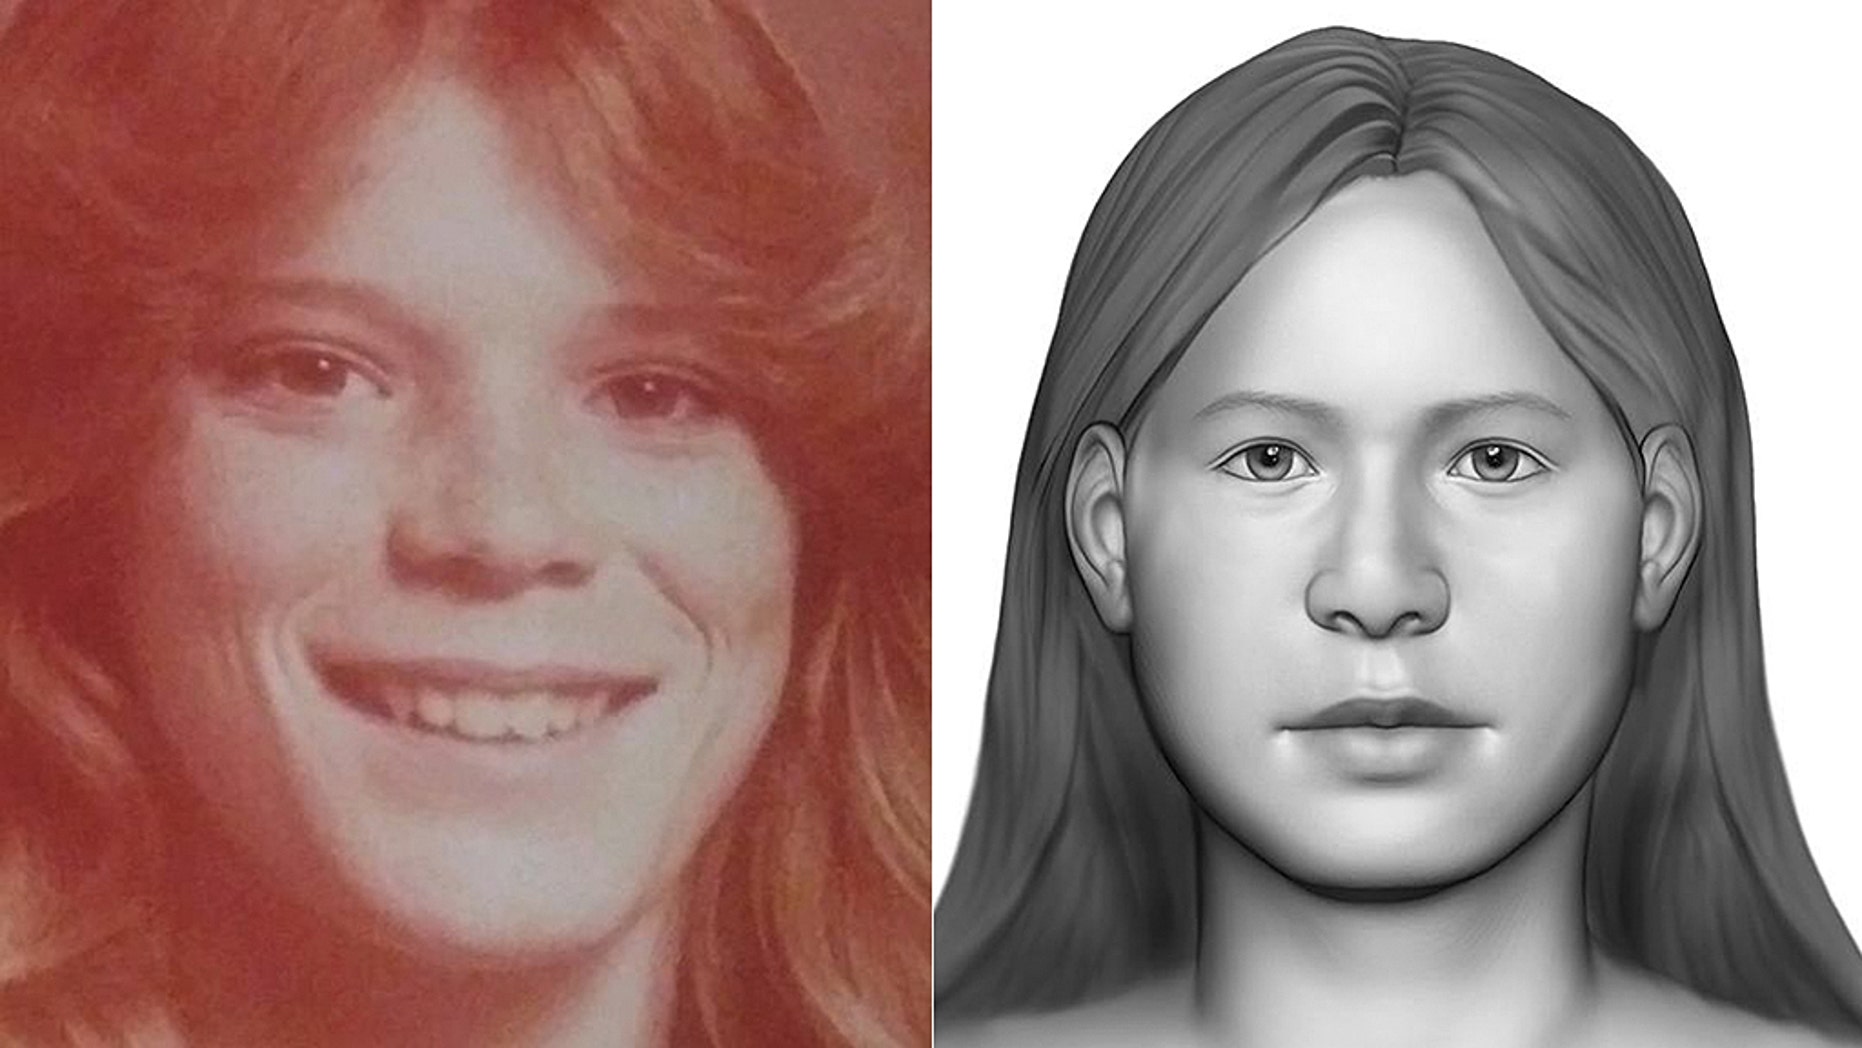 Murdered 20-year-old woman finally identified 31 years later